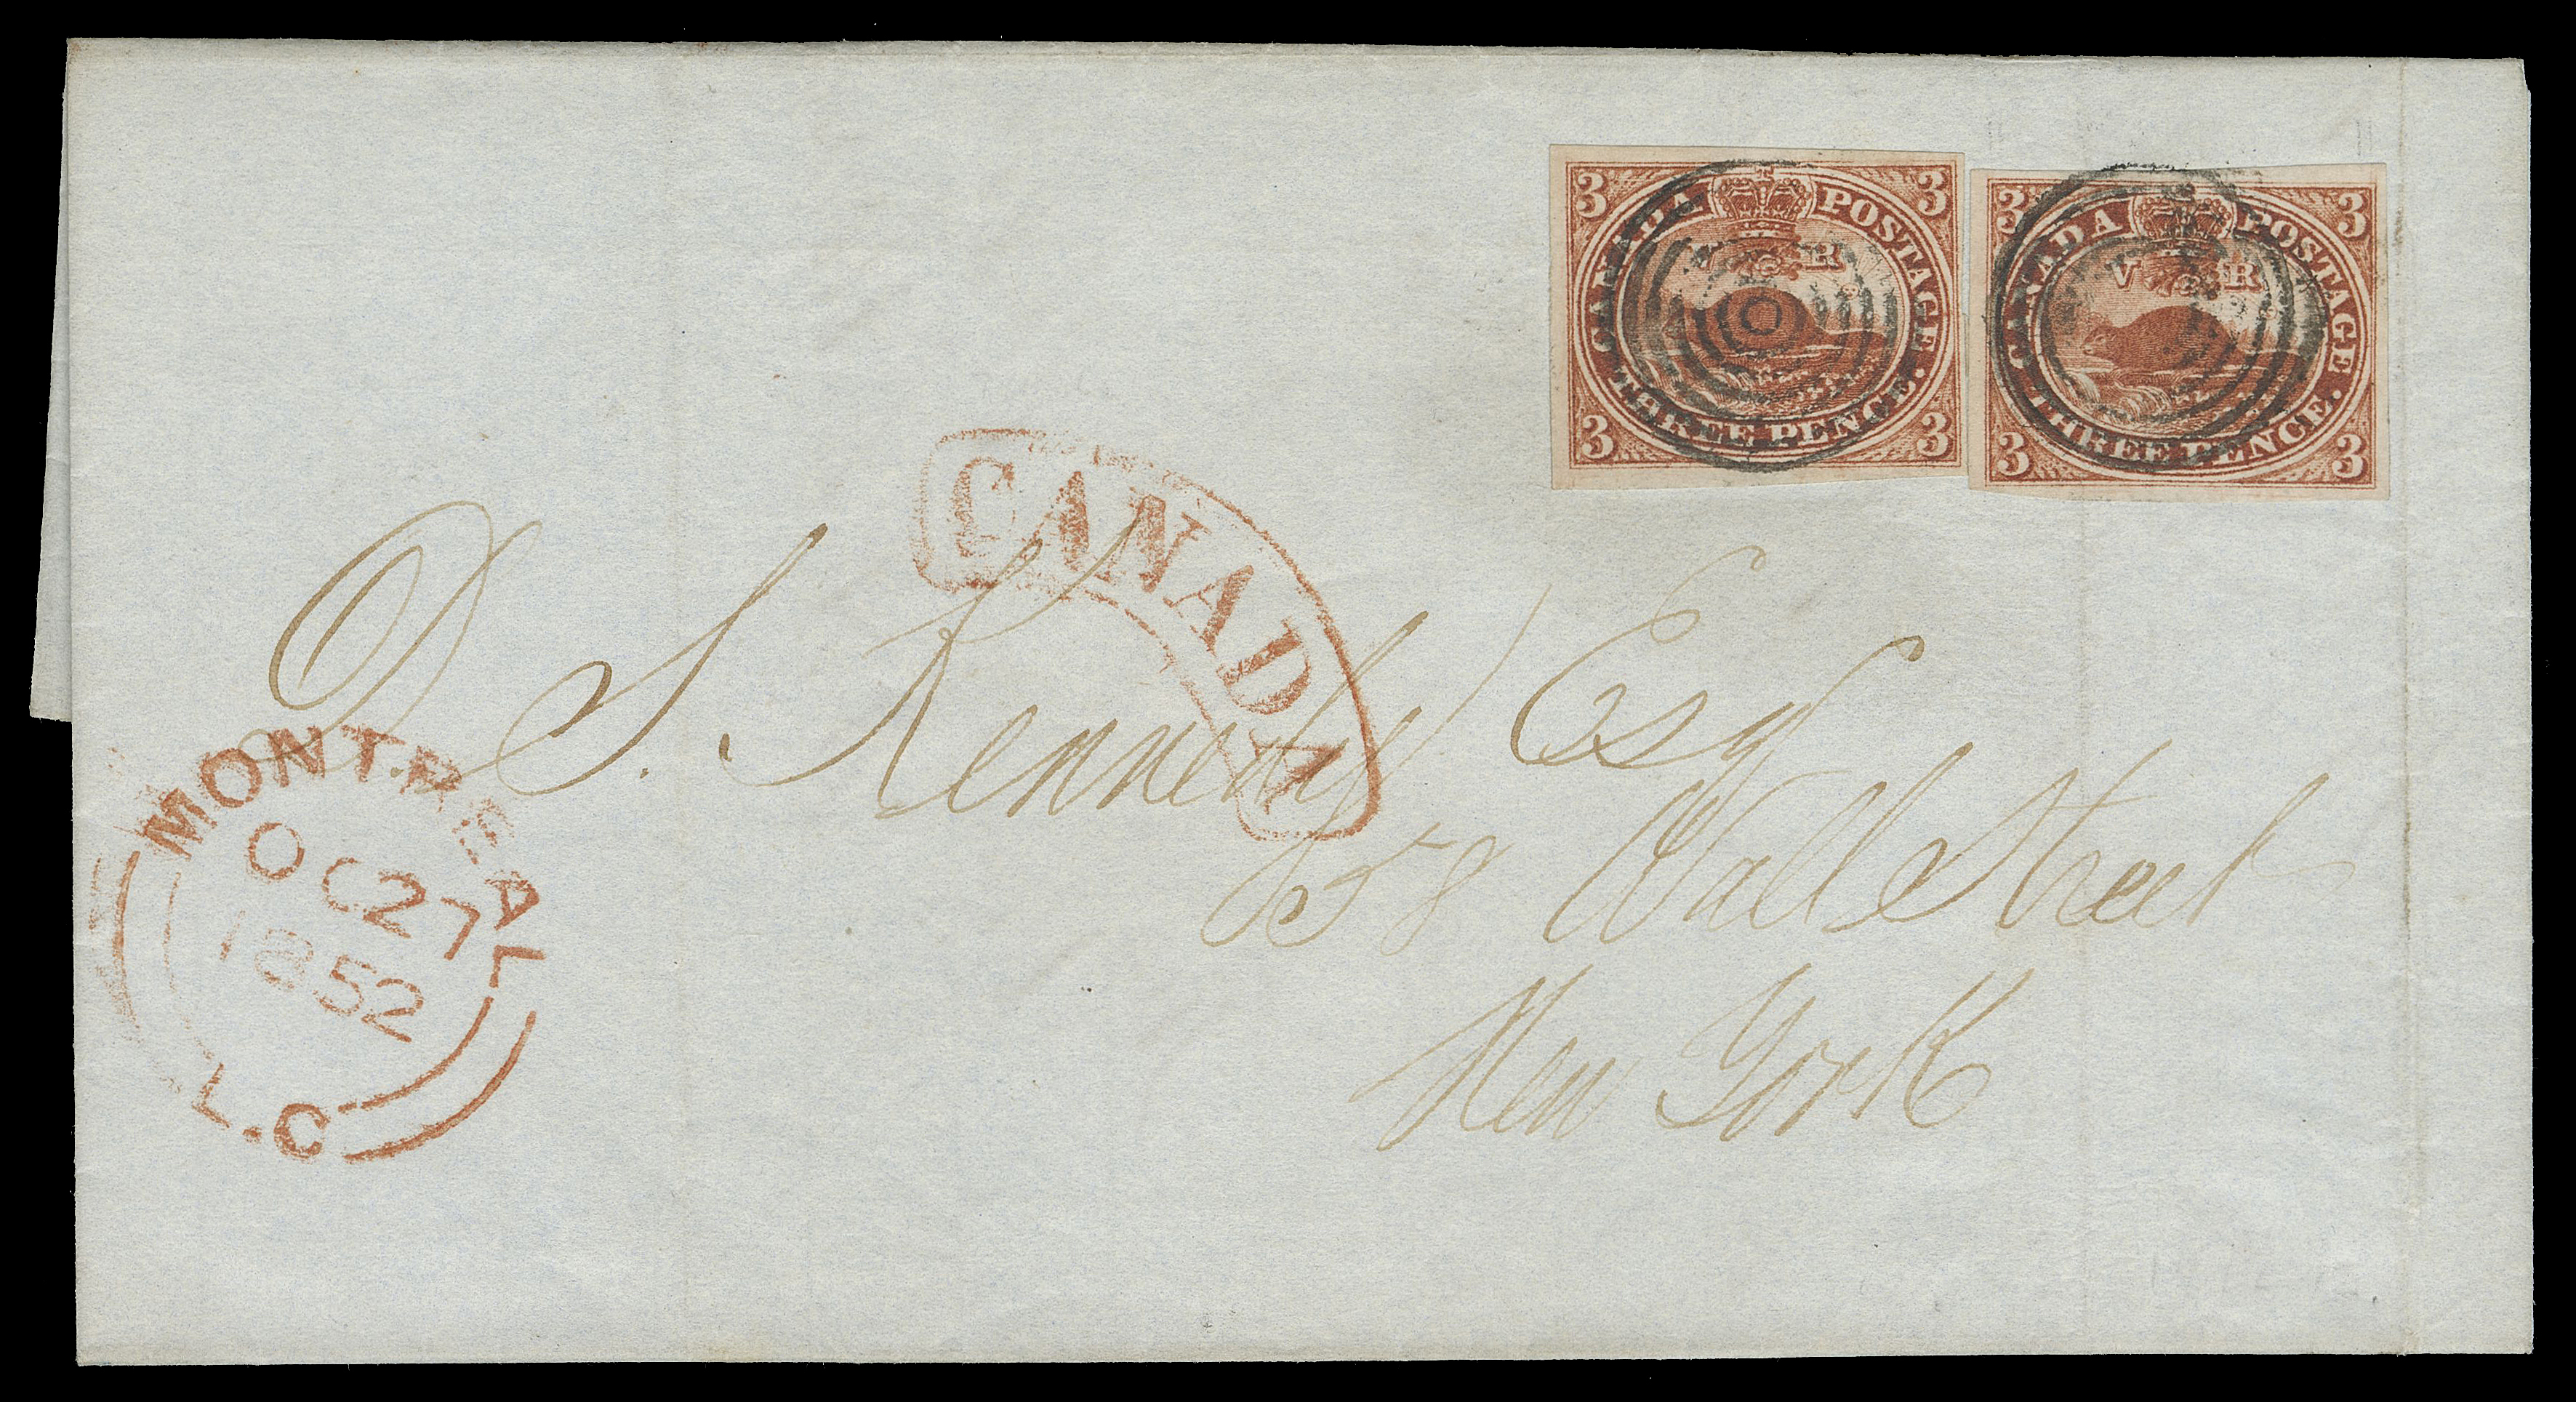 THREE PENCE AND FIVE CENTS  1852 (October 27) Folded cover from the well-known Kennedy correspondence bearing two select 3p red on medium wove paper, imperforate, each large margined with amazing deep colour and sharp impression for such an early printing, neat concentric rings cancels, Montreal double arc dispatch in red, sent to New York, border exchange office arc CANADA in red, couple light file folds, one through right stamp; a beautiful cover of wonderful appeal, VF (Unitrade 4 early printing)

Provenance: Kasimir Bileski Pence Issue Collection, Eaton & Sons, June 1995; Lot 229

Literature: Interesting article in BNA Topics Whole 87, Volume 9, No. 1, pages 19-20, pertaining to this cover.